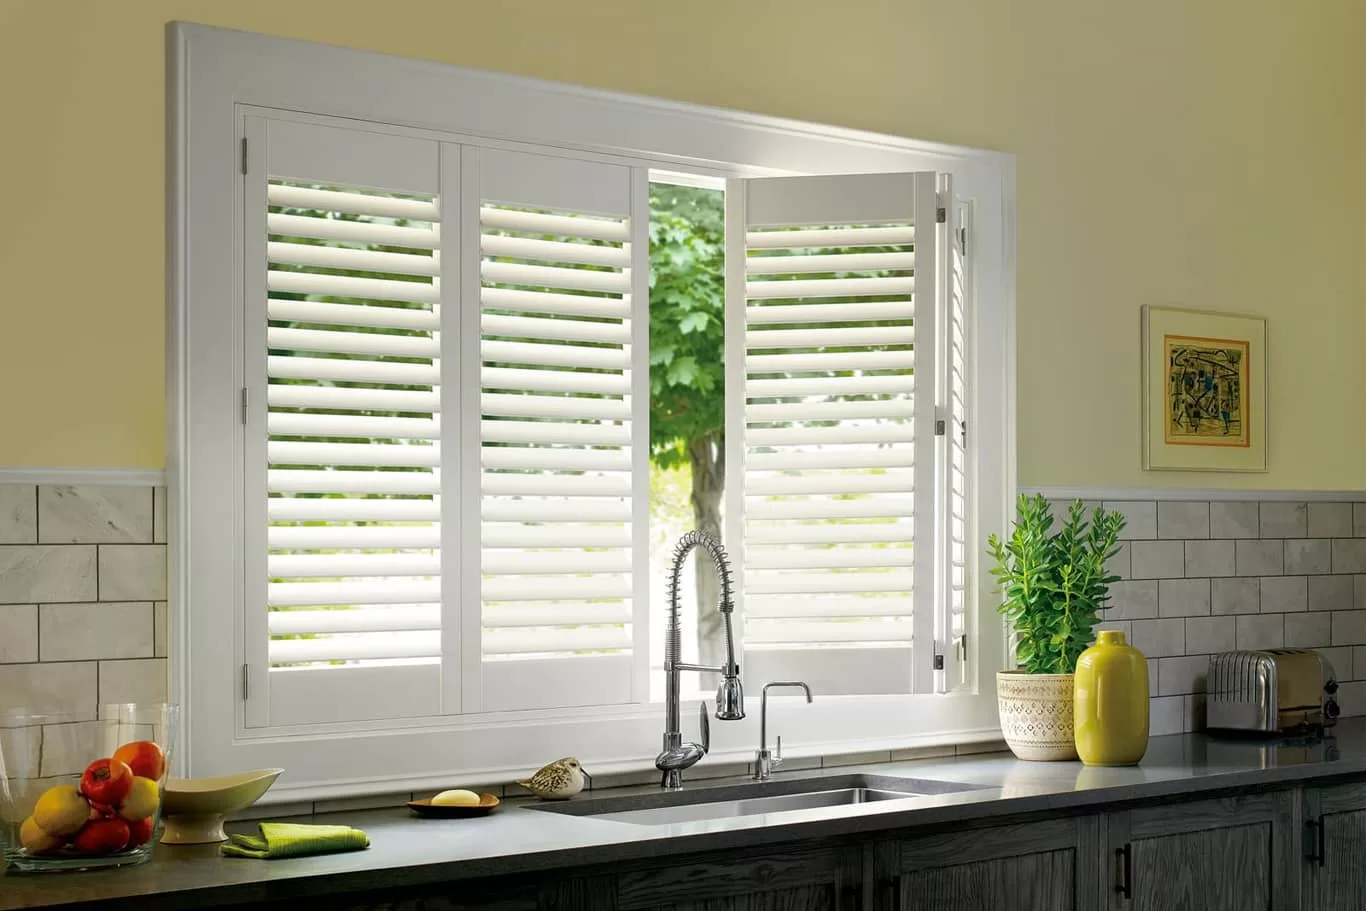 4 Reasons Why Shutters are the Best Window Treatments for Casement Windows